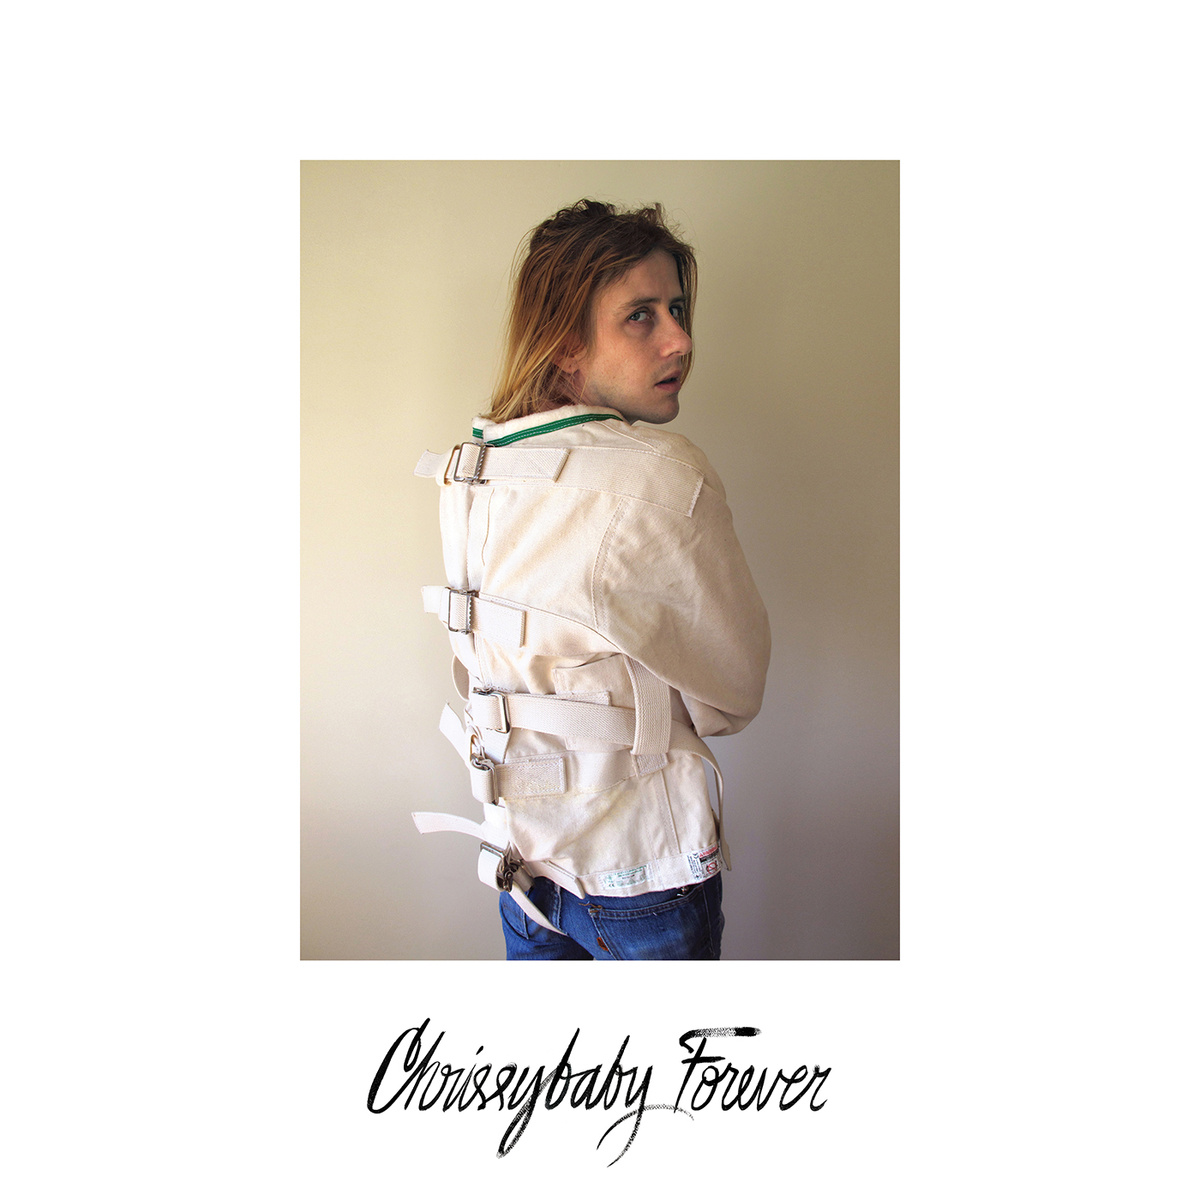 Christopher Owens- Chrissybaby Forever